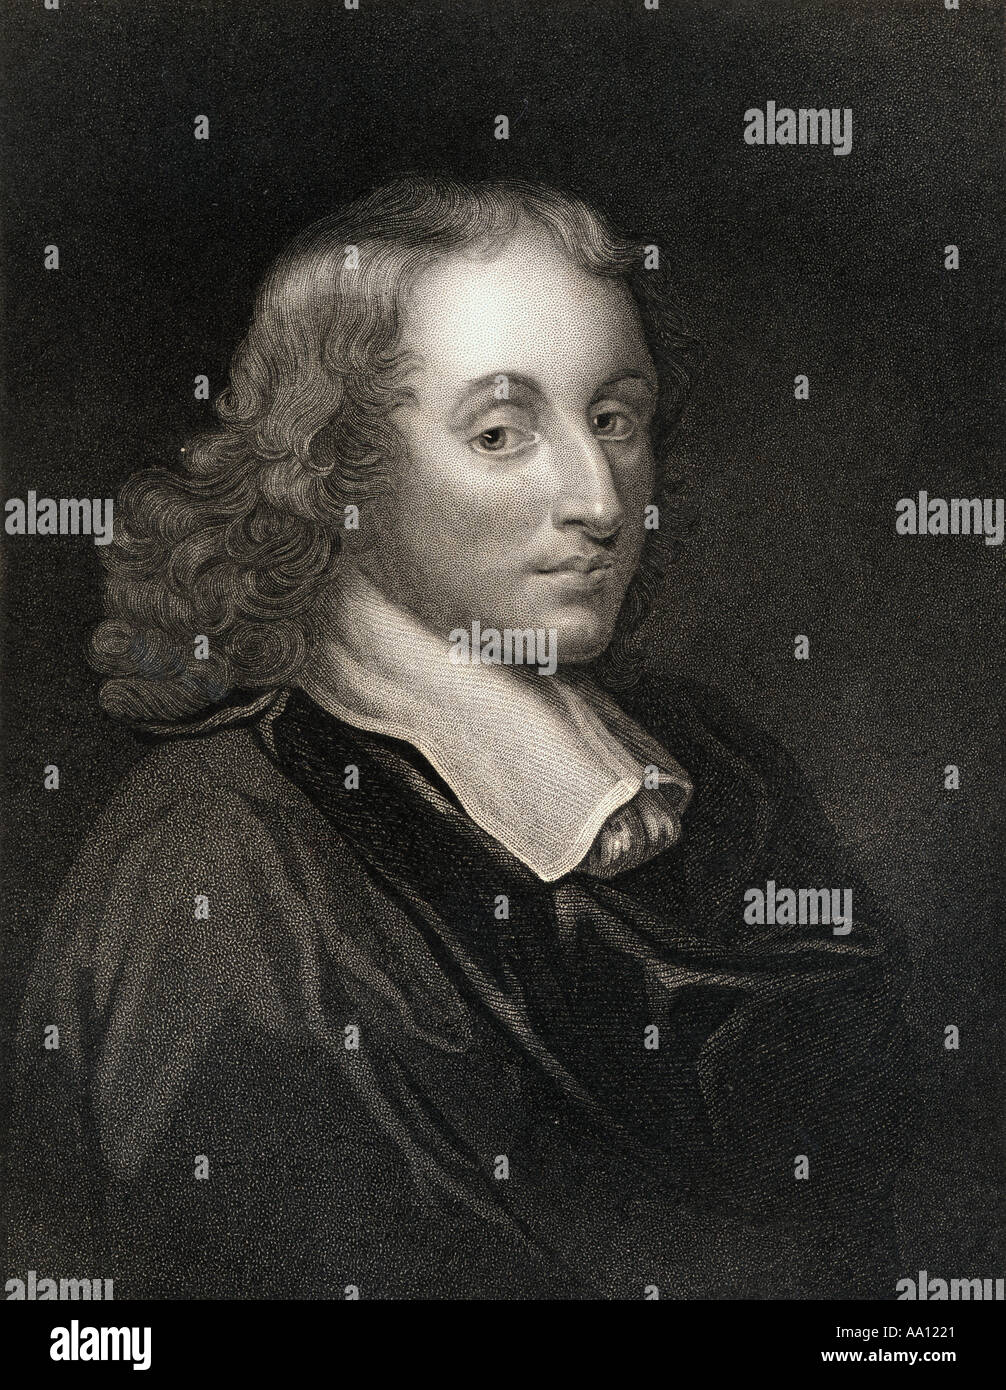 Blaise Pascal, 1623 - 1662. French mathematician, physicist, inventor, writer and Catholic theologian. Stock Photo